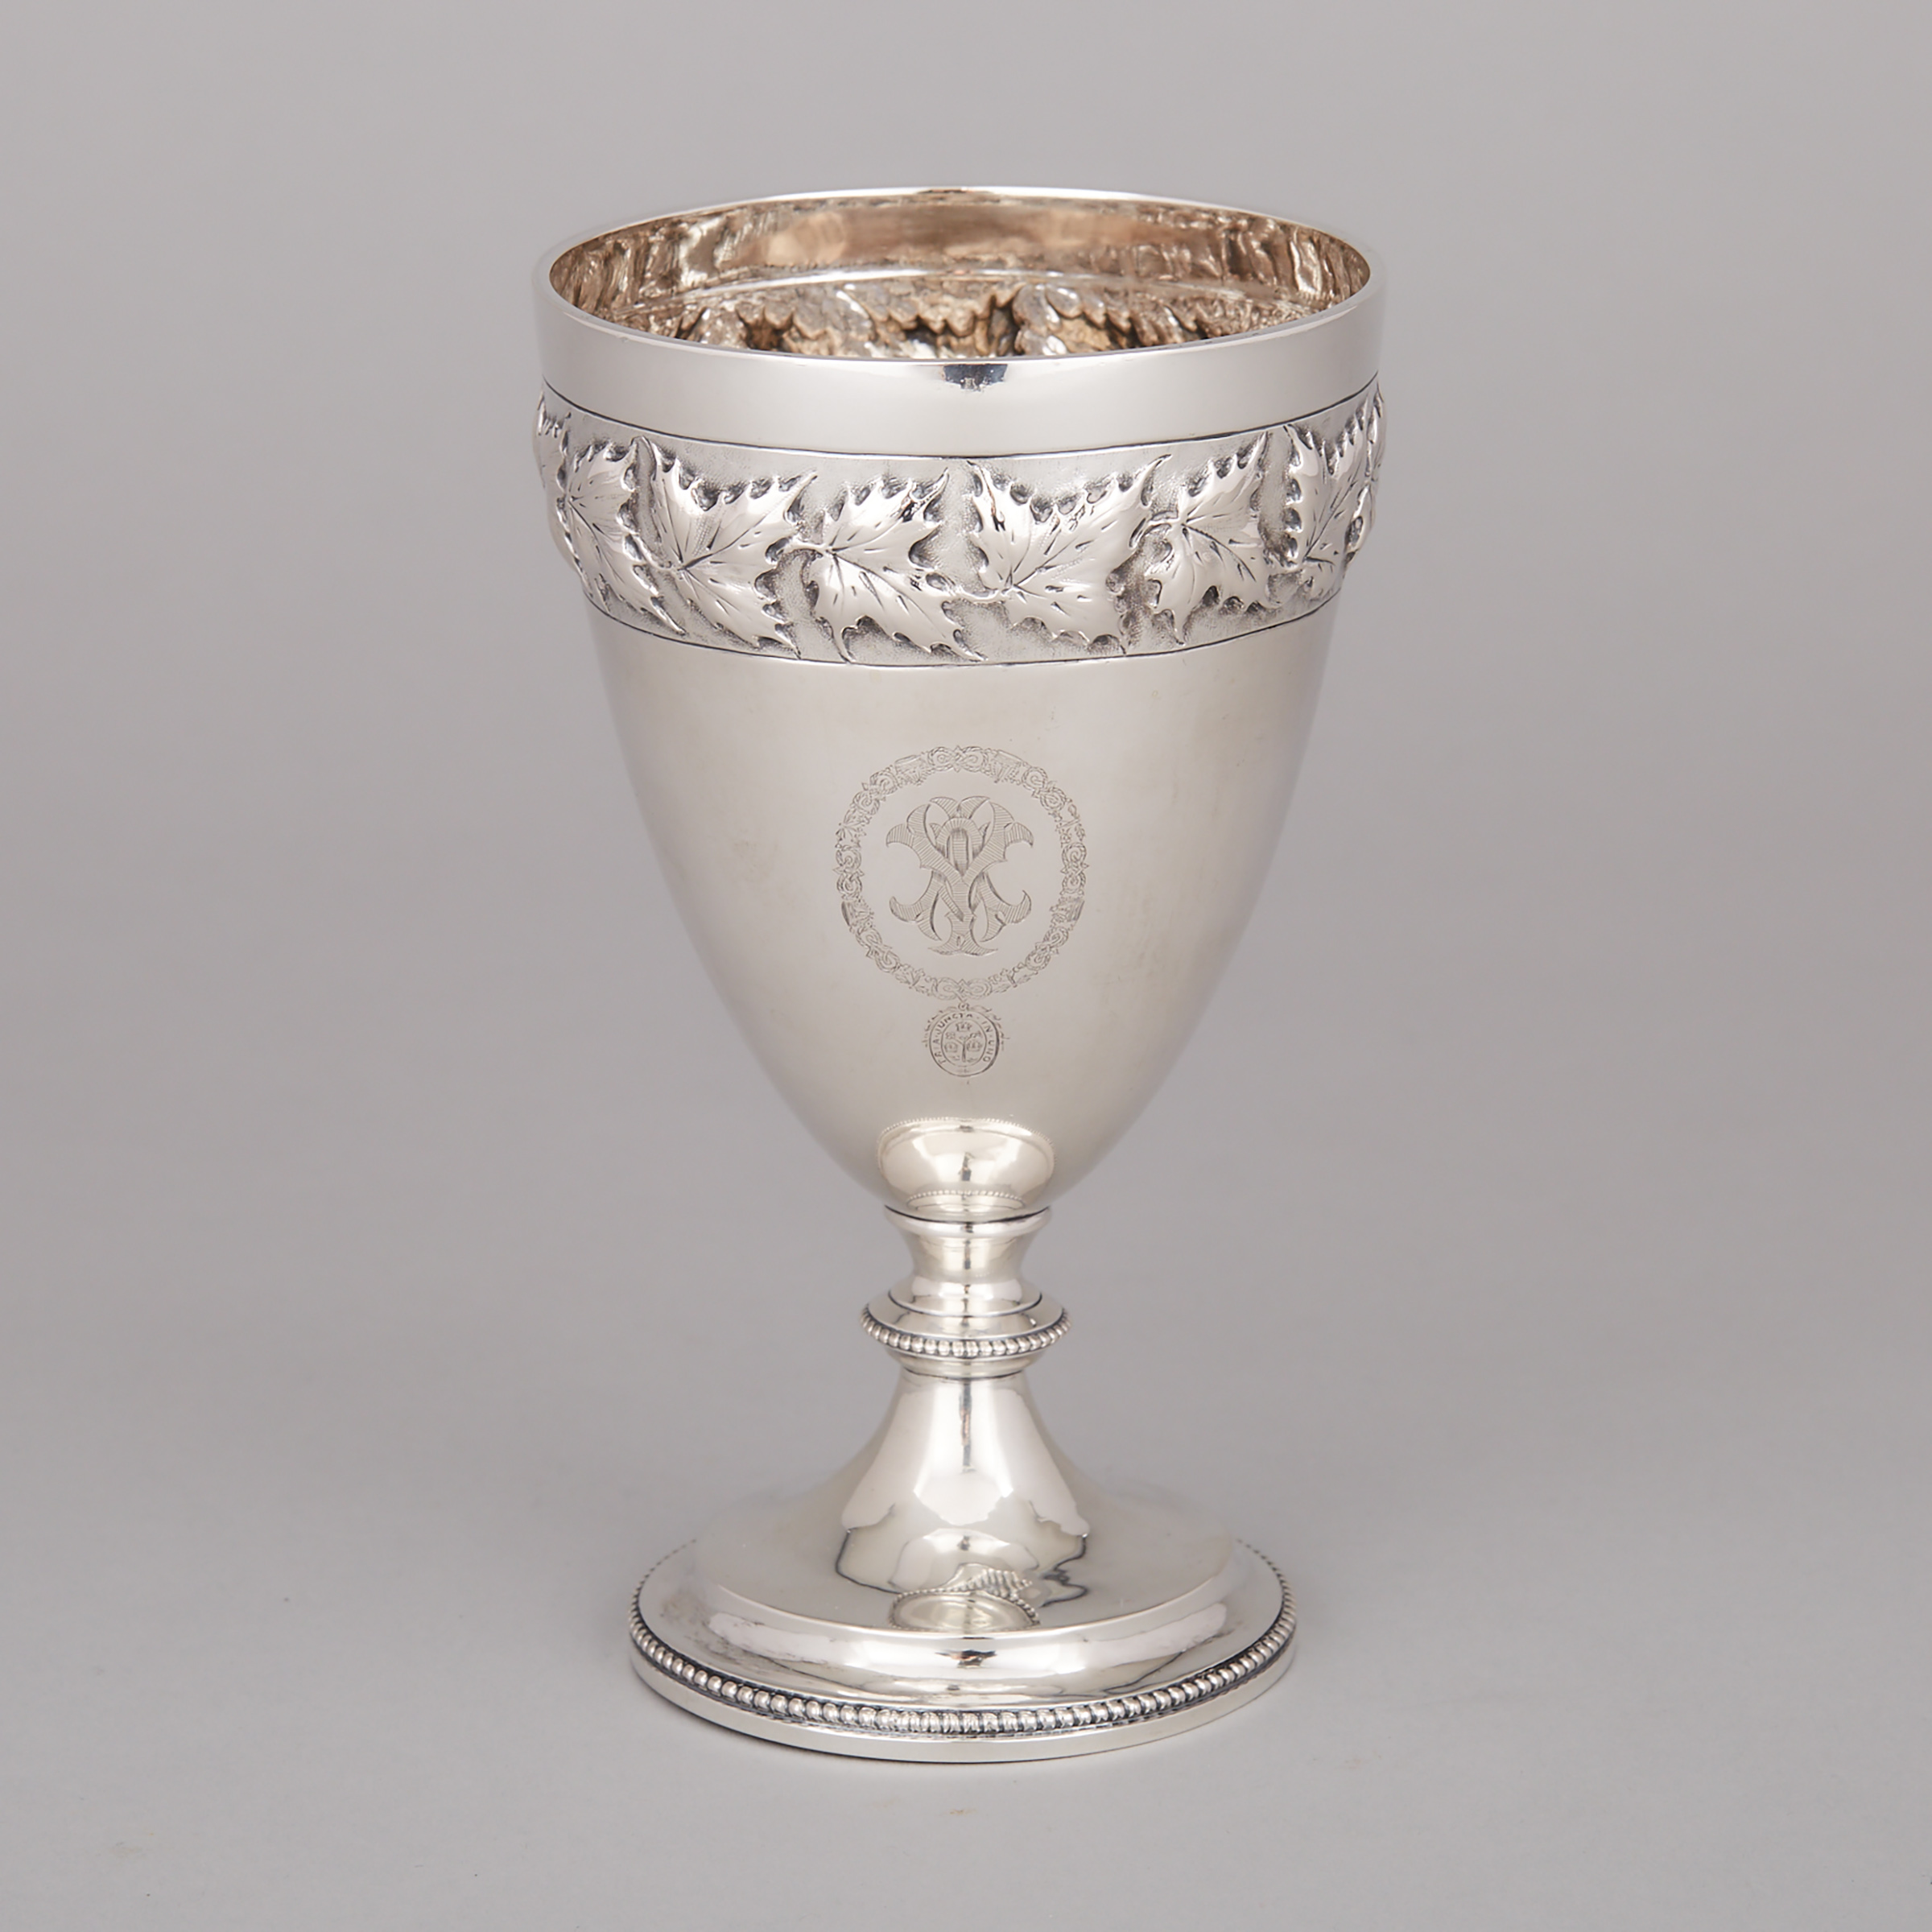 Canadian Silver Goblet, Savage, Lyman & Co., Montreal, Que., c.1868-79